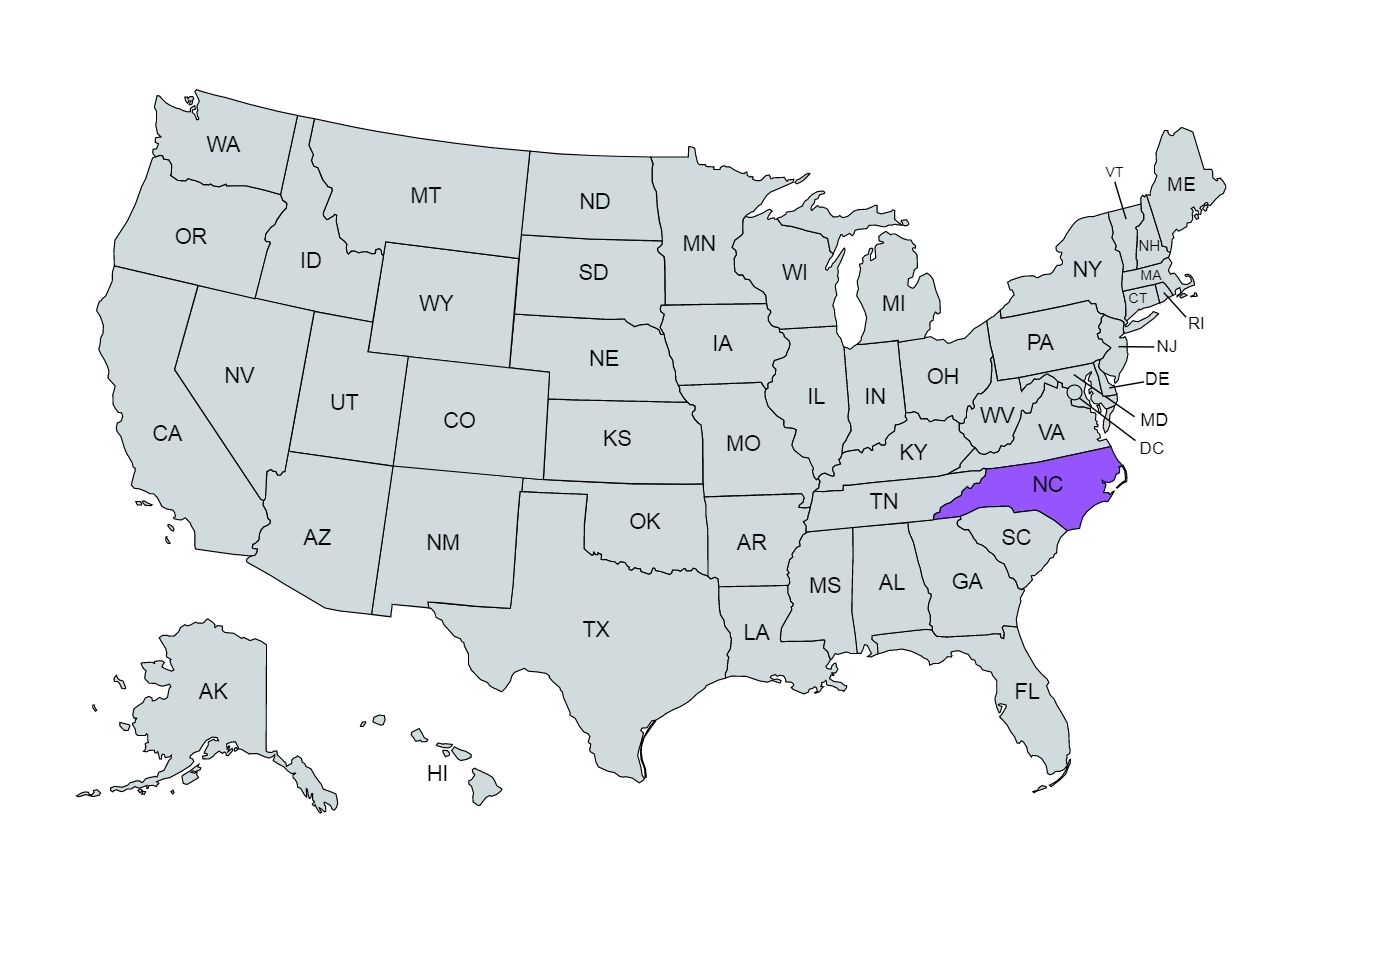 The US map with the North Carolina state marked in purple